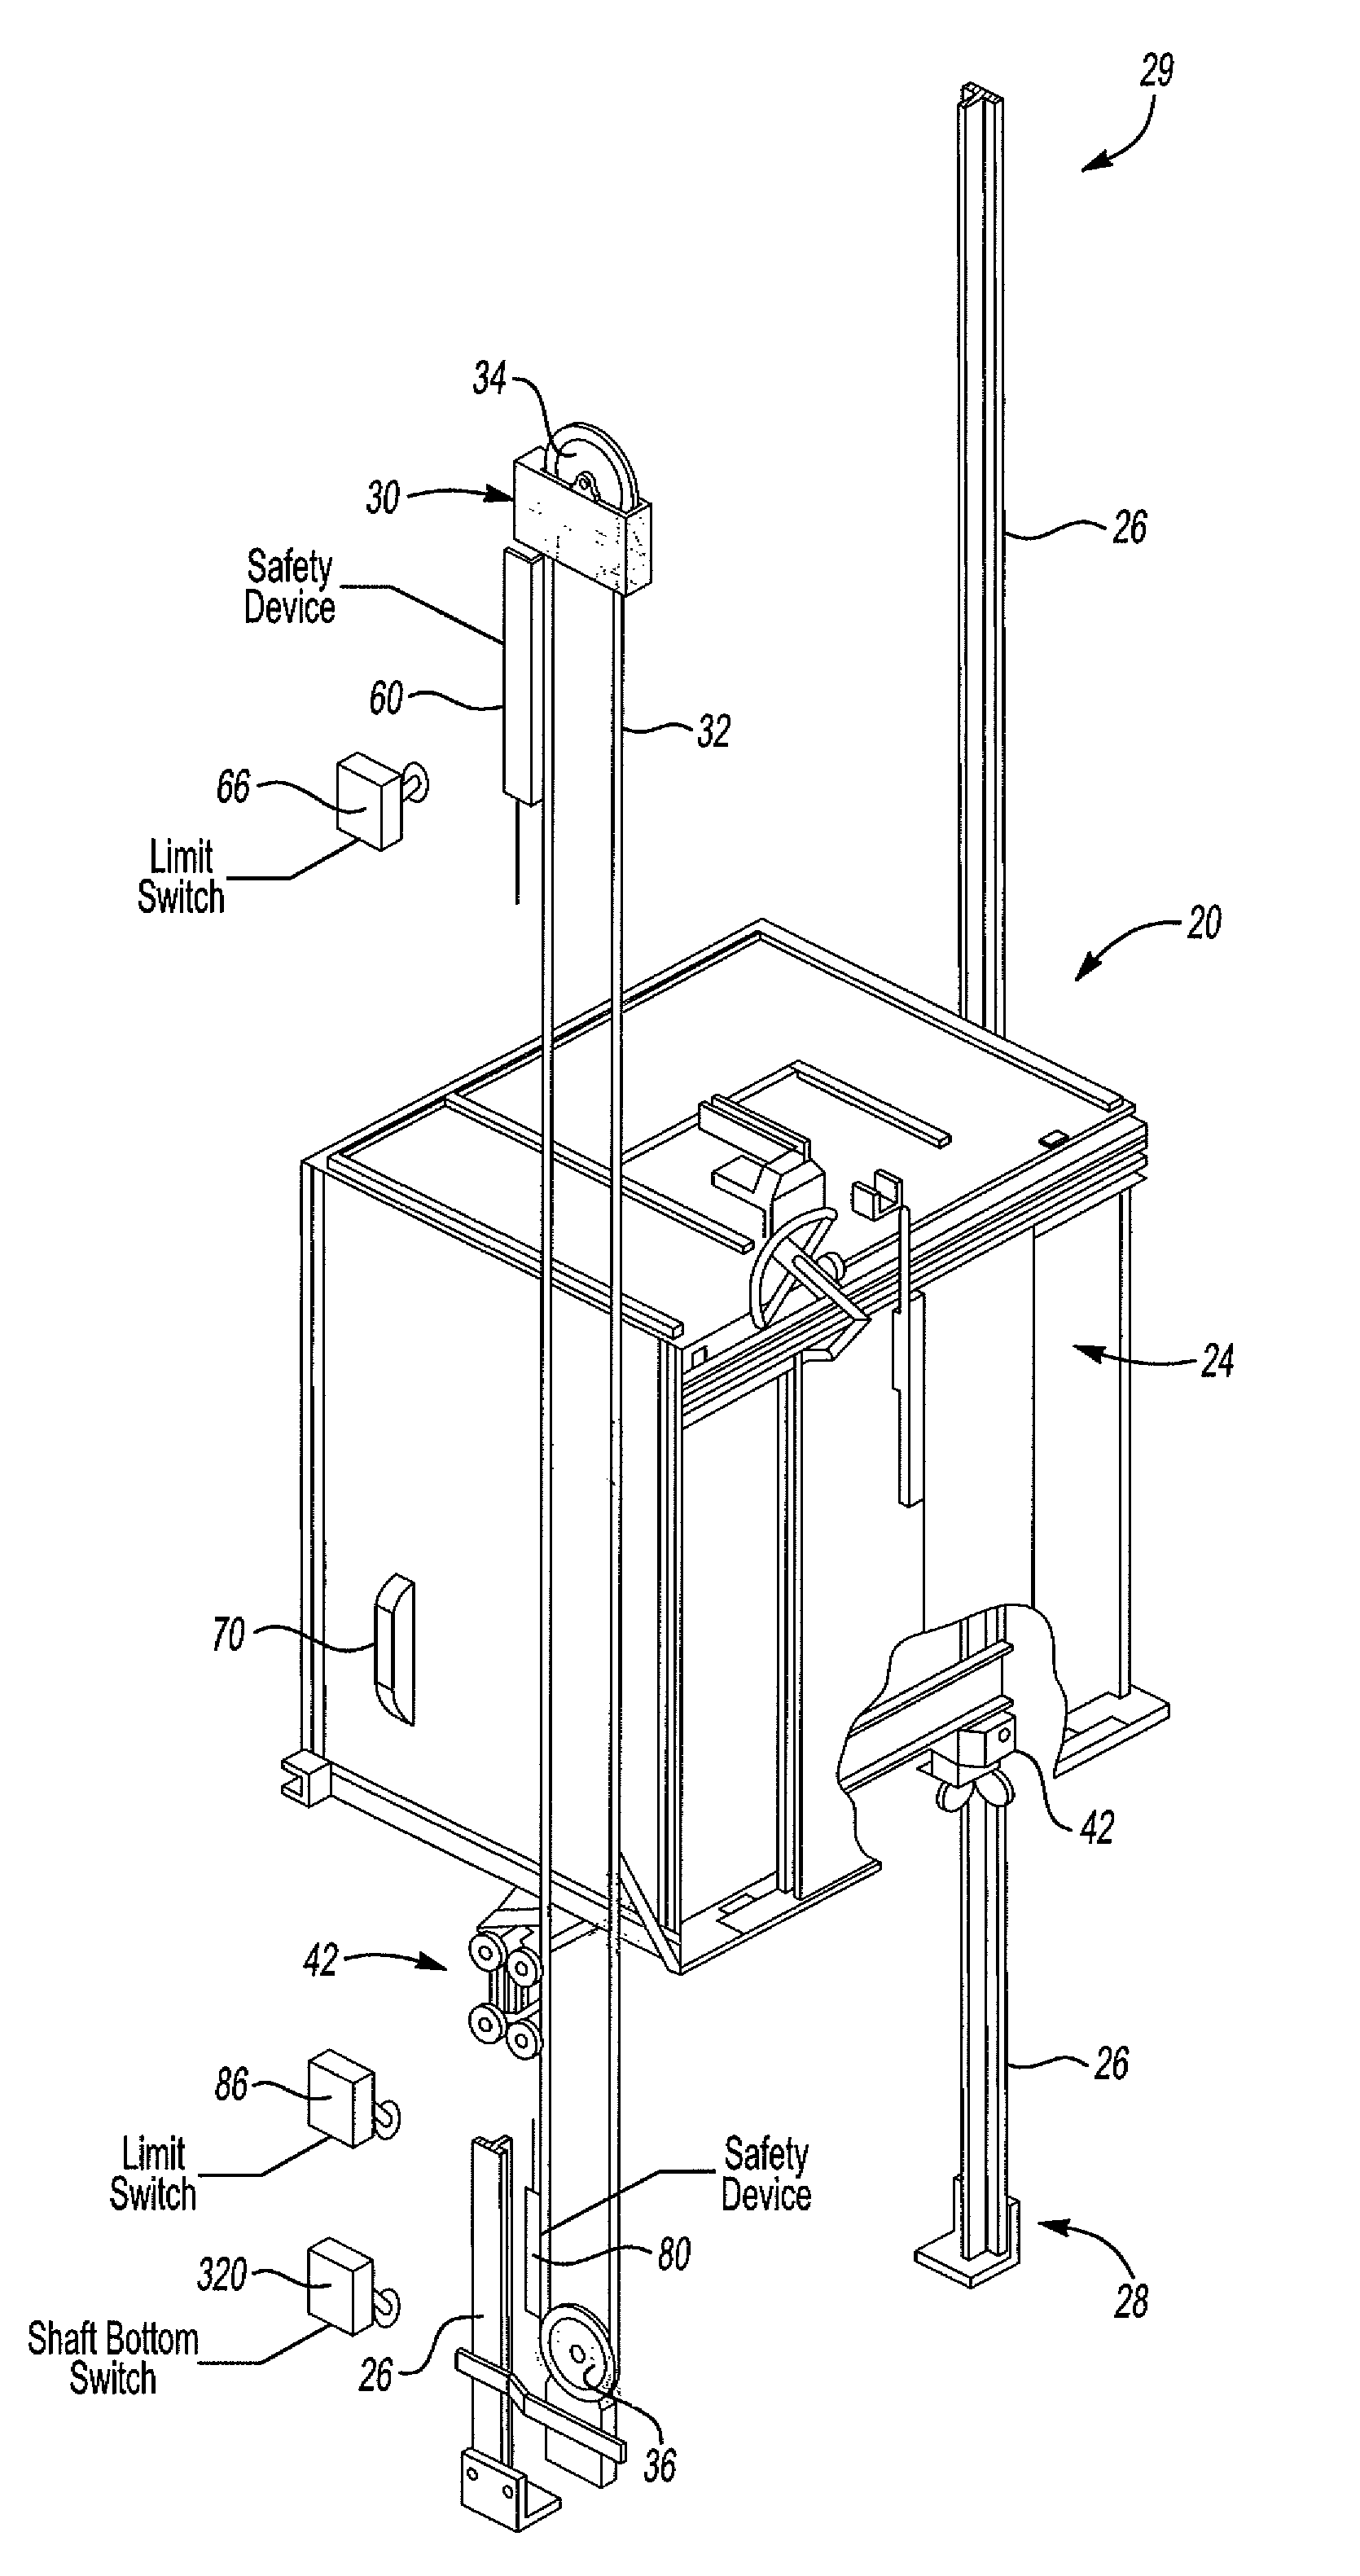 Elevator having a limit switch for controlling power to the drive system as an elevator car approaches a shallow pit or a low overhead